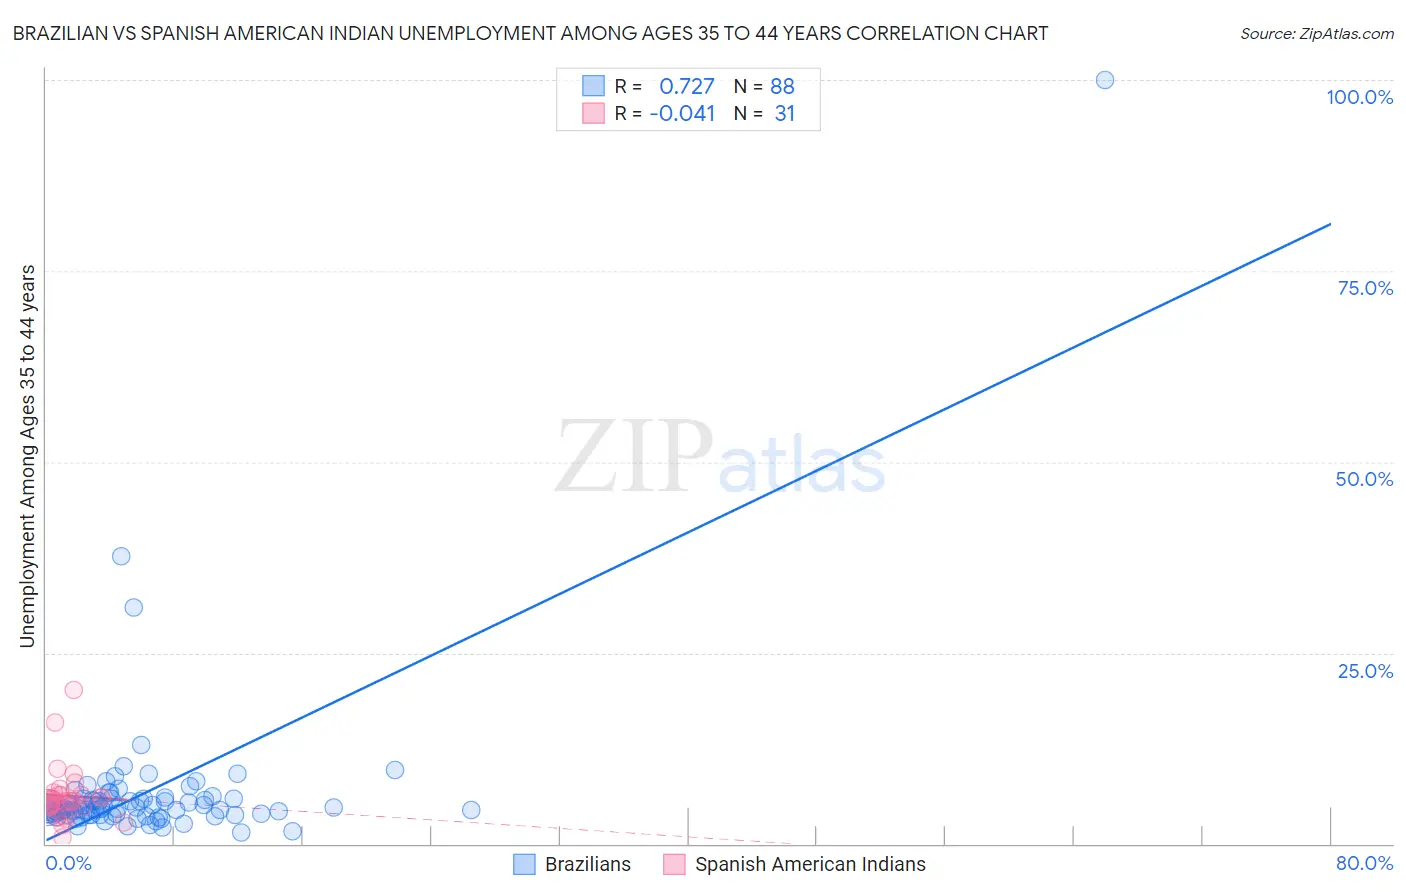 Brazilian vs Spanish American Indian Unemployment Among Ages 35 to 44 years